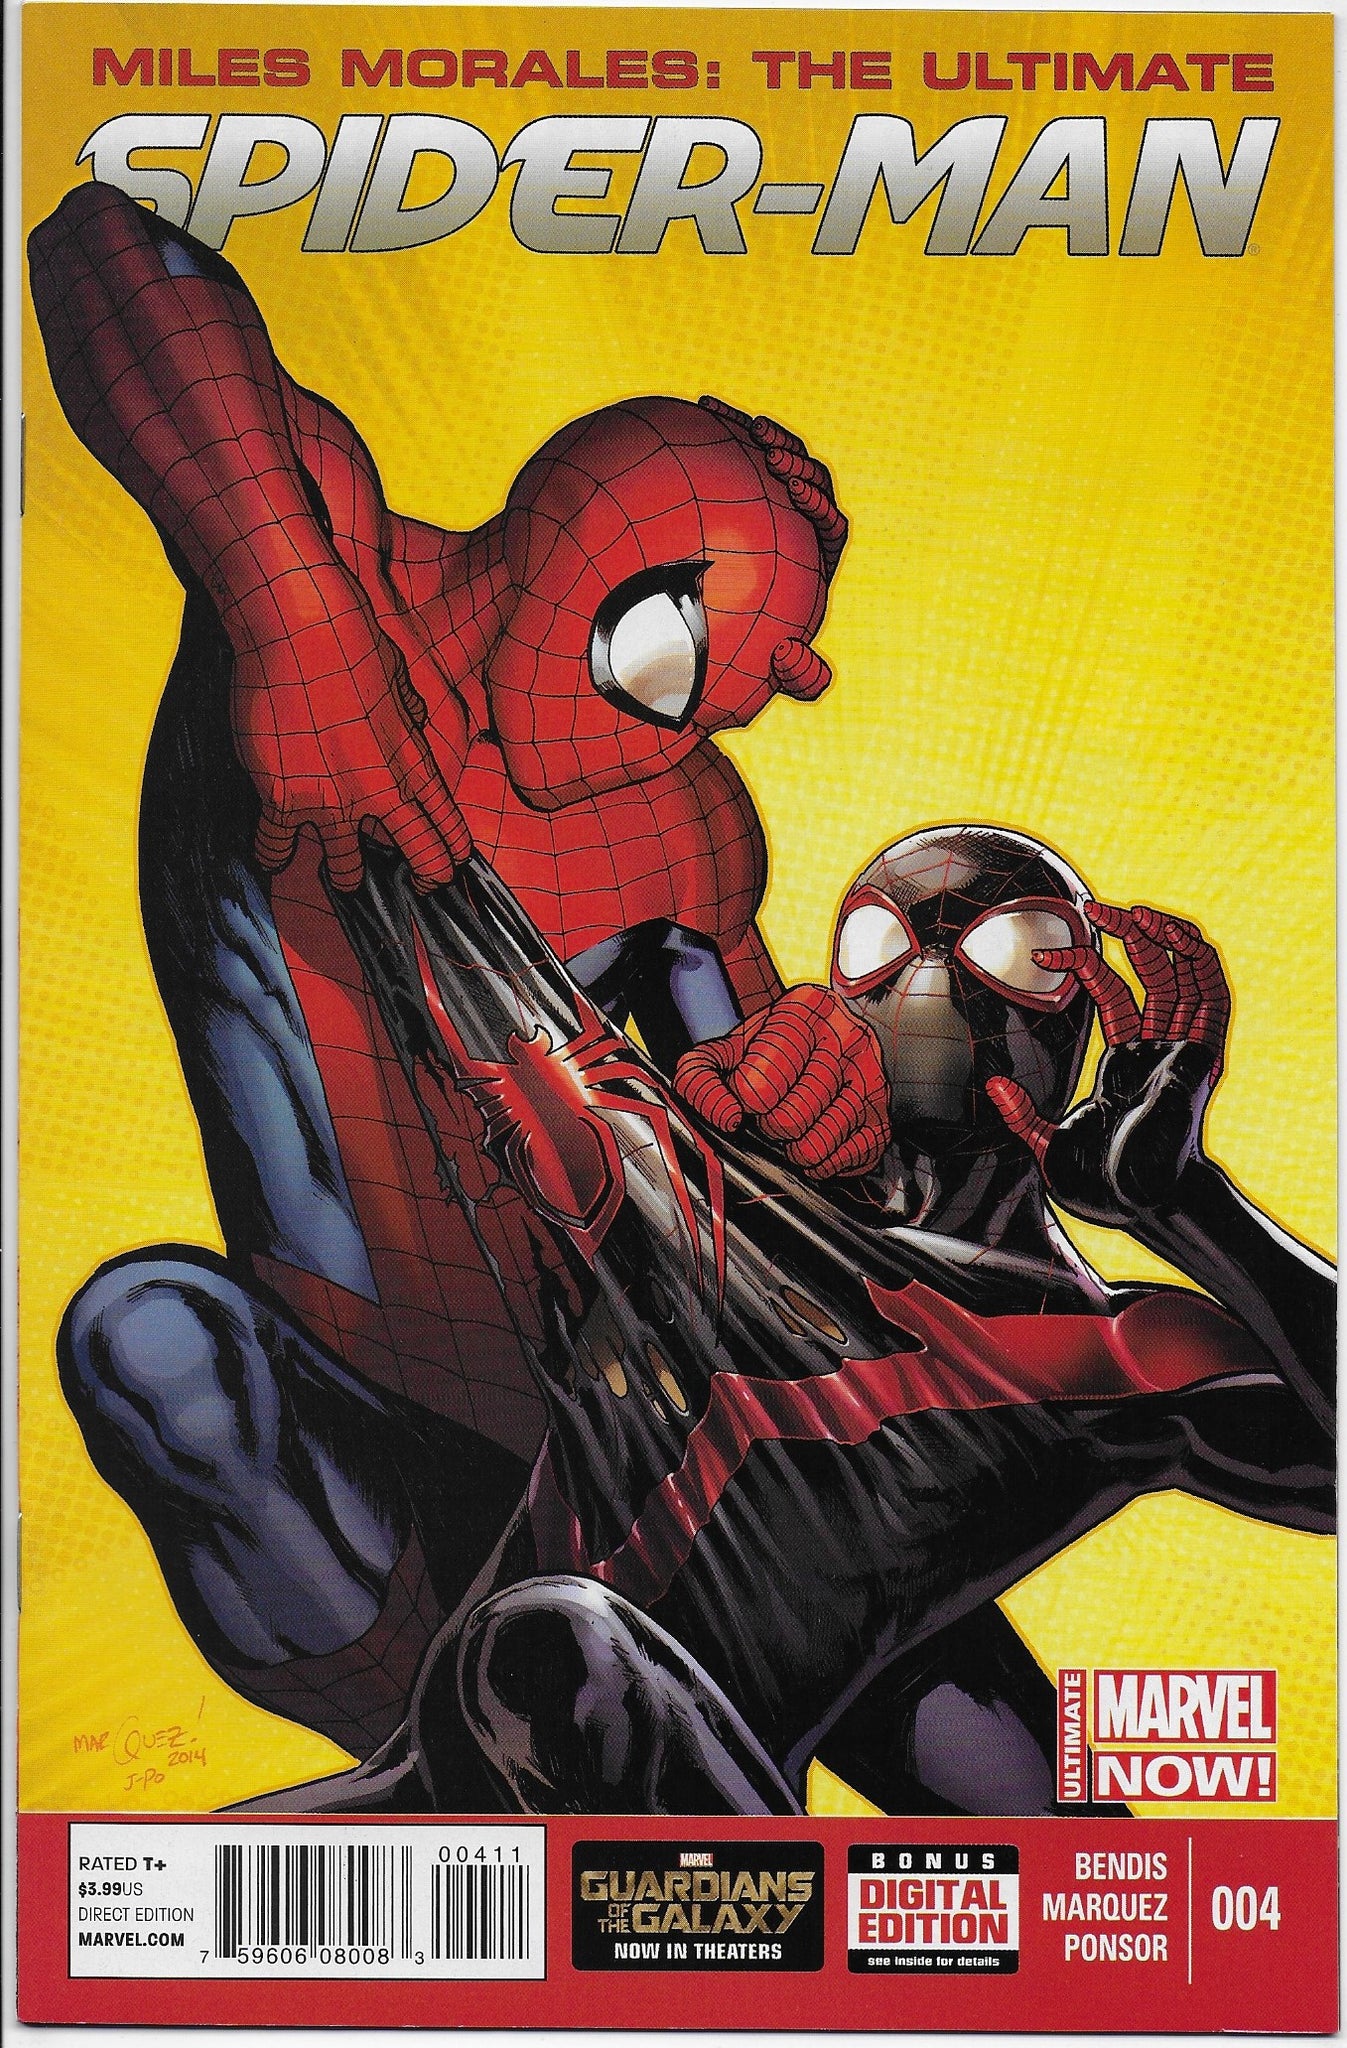 miles morales: the ultimate spider-man 4